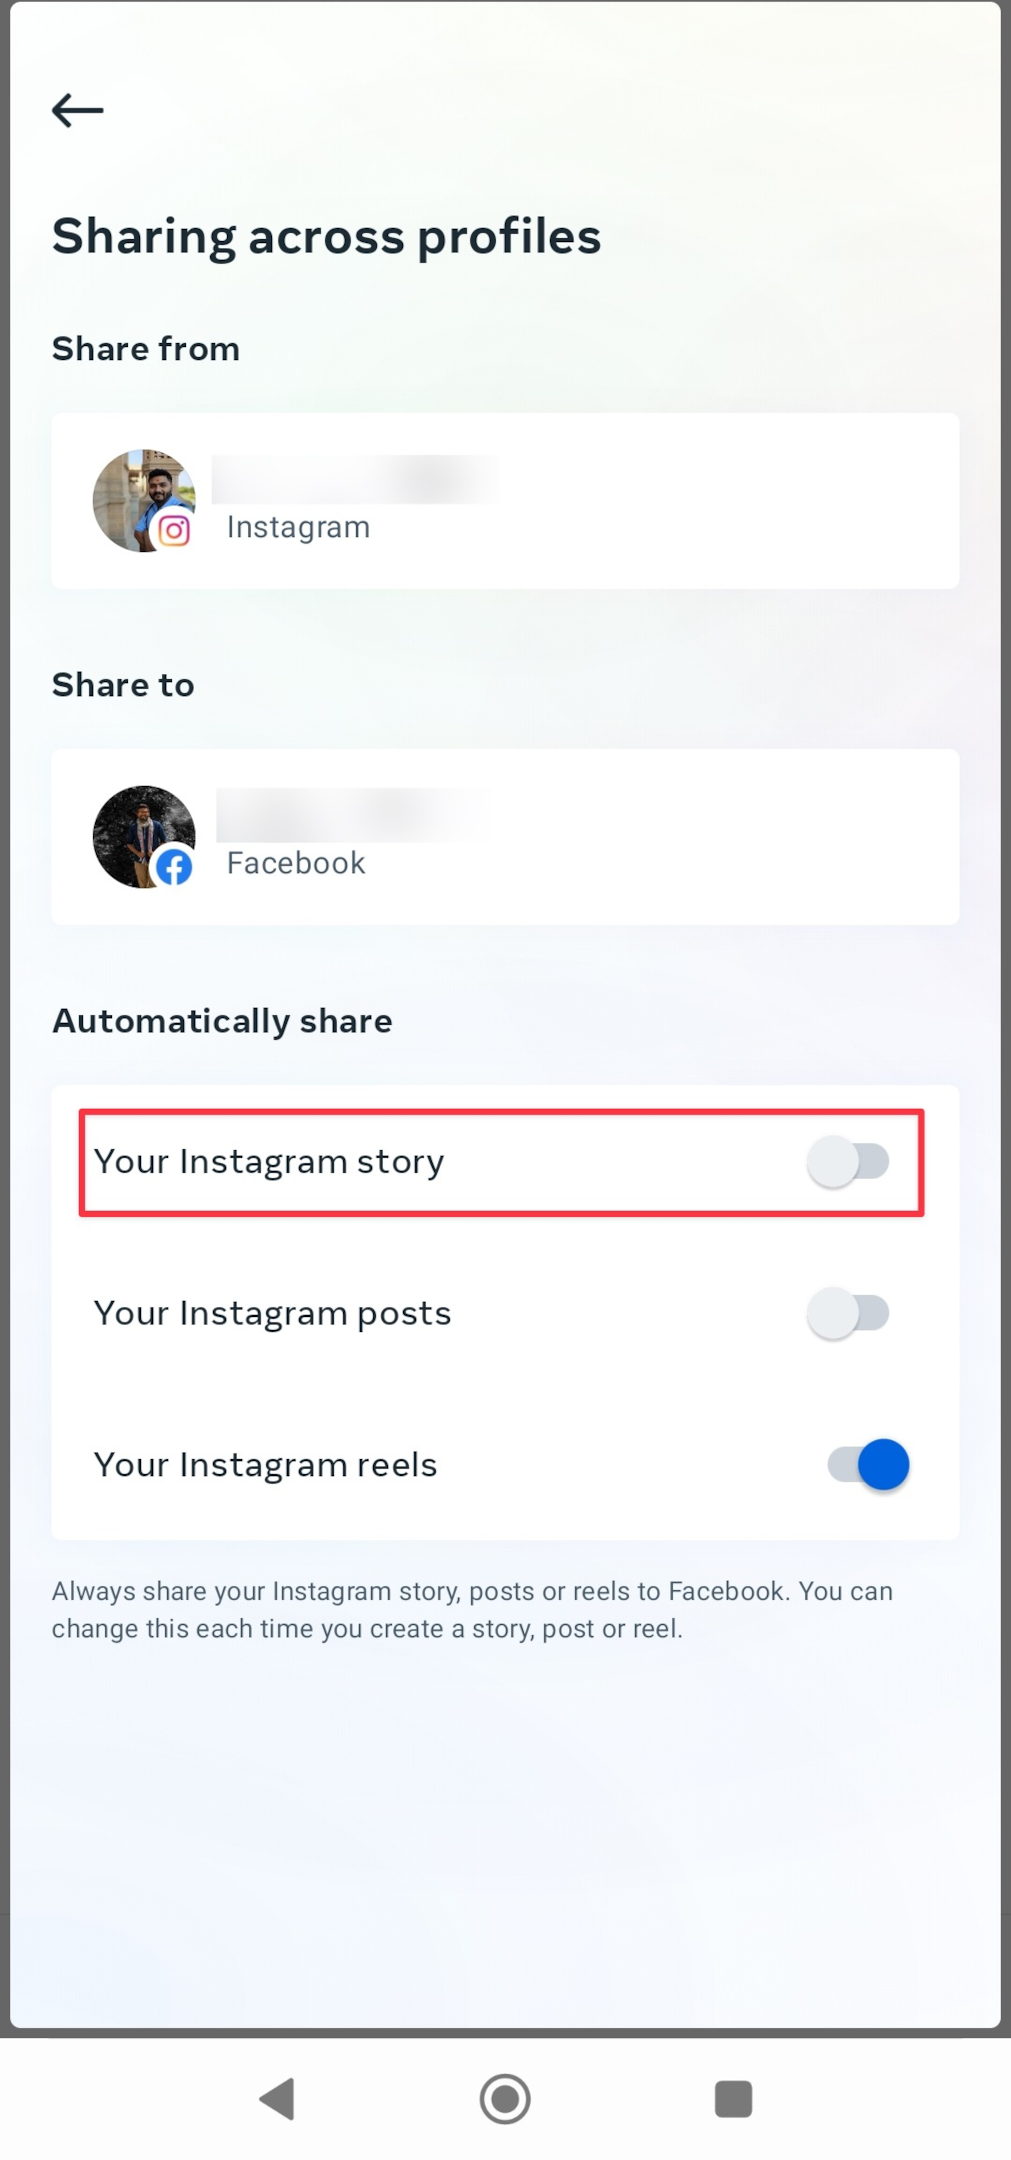 Remote.tools shows how to share stories from Instagram to Facebook